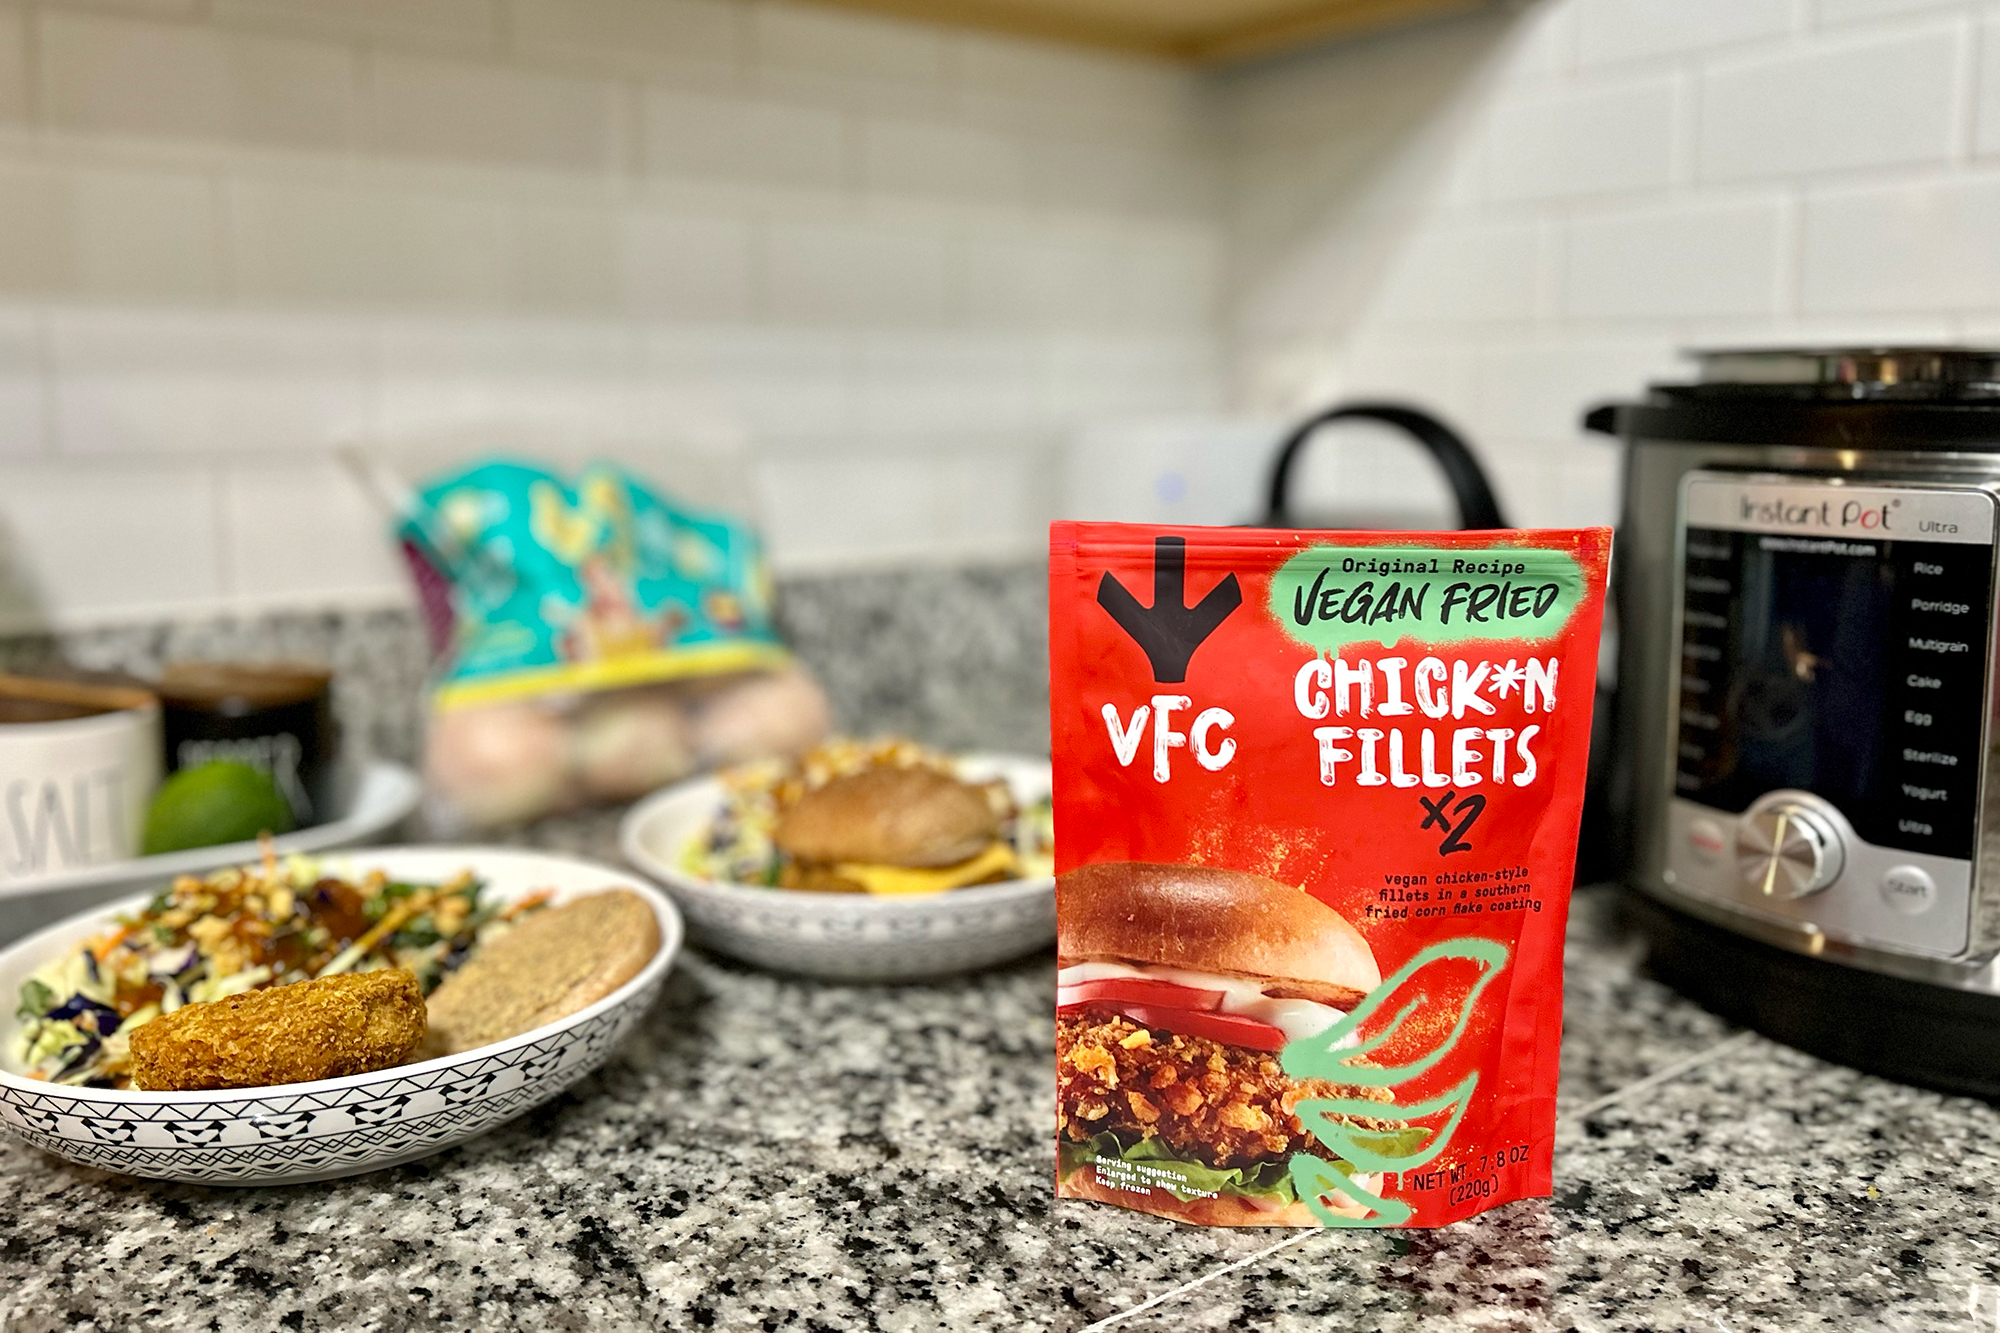 VFC vegan chickn fillet package on the counter between sandwiches and an air fryer